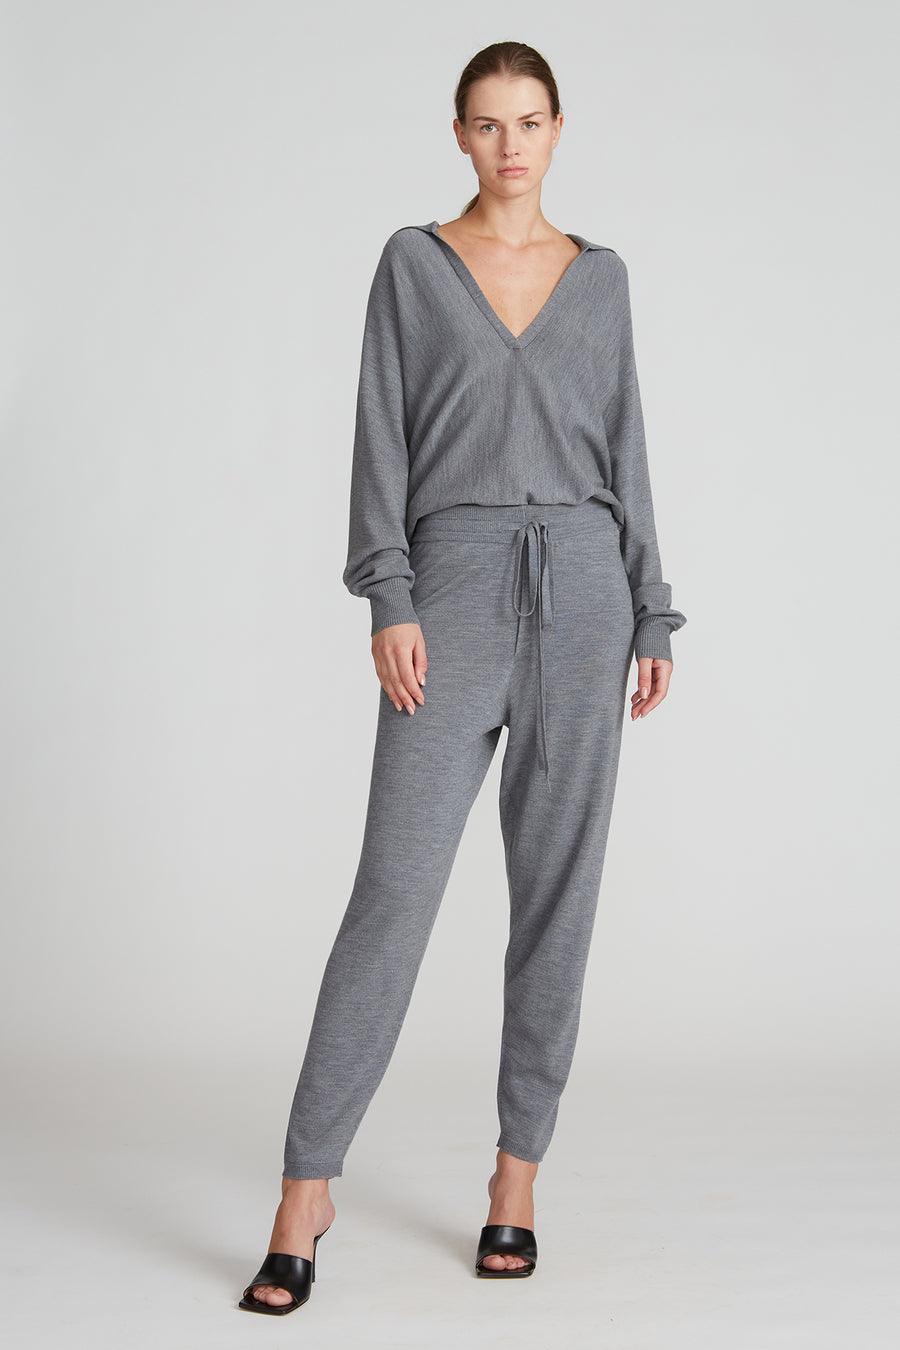 Claire Sweater Pant